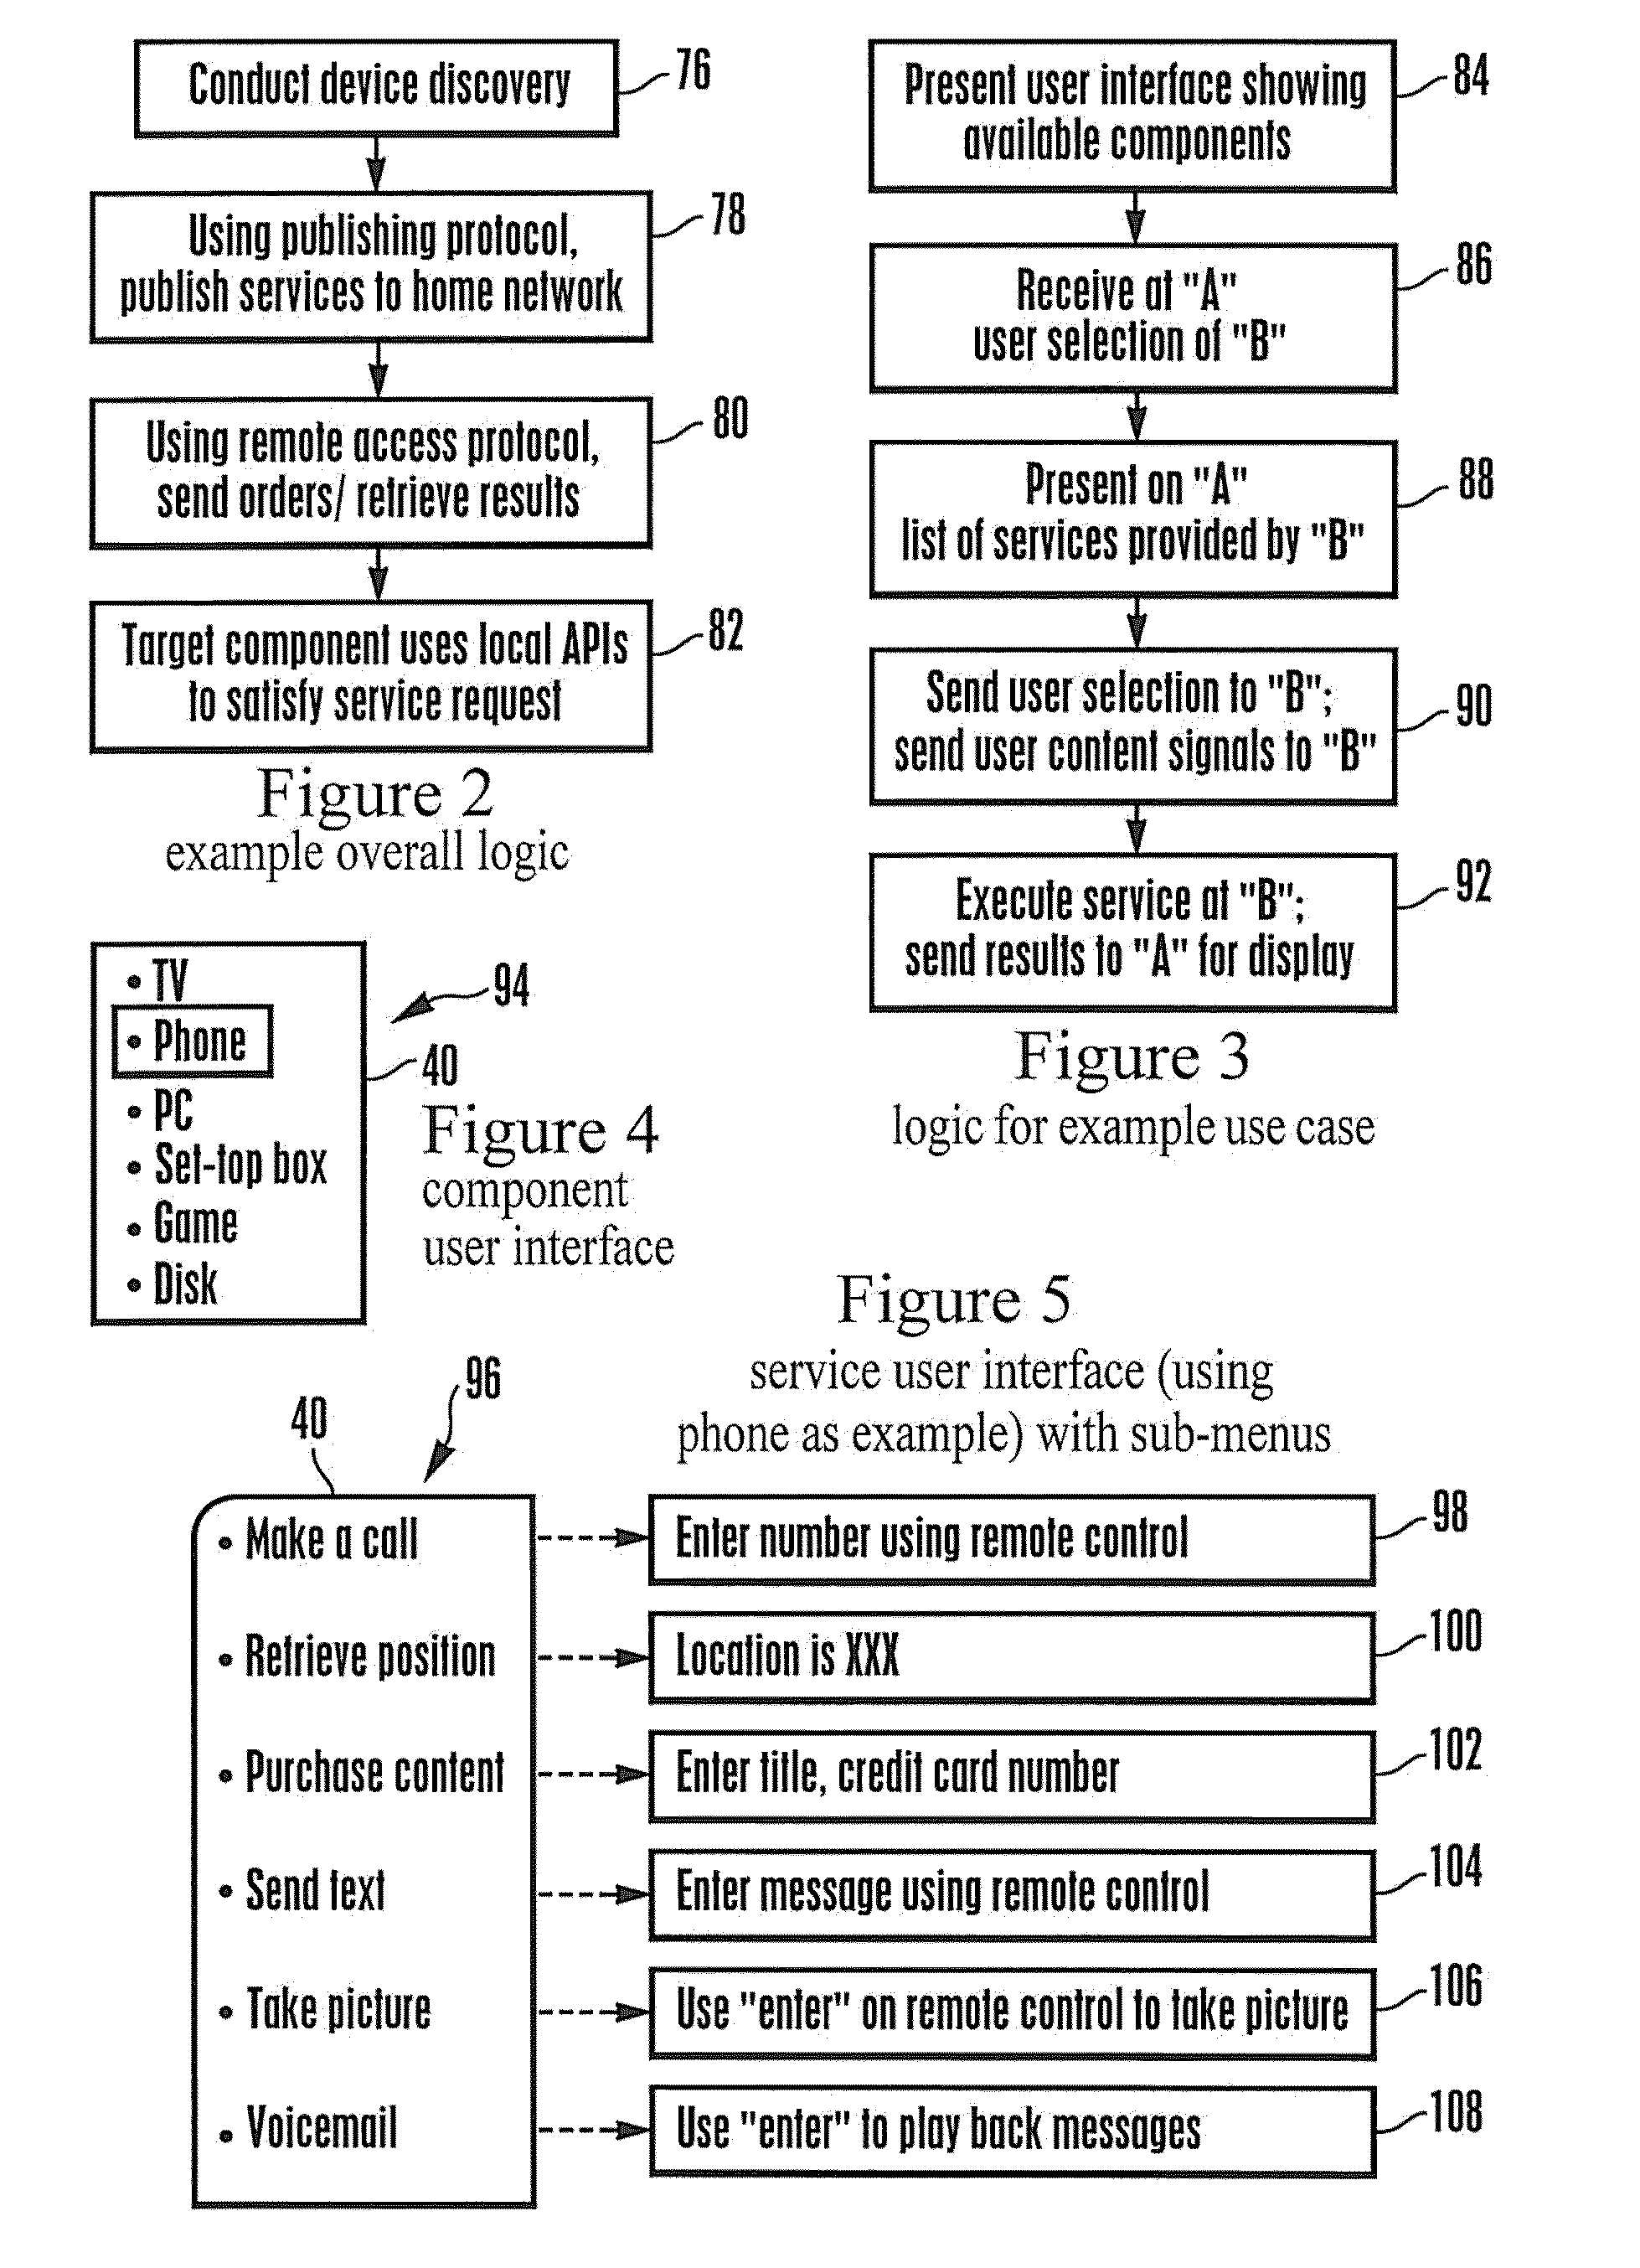 Home network component controlling data and function of another home network component